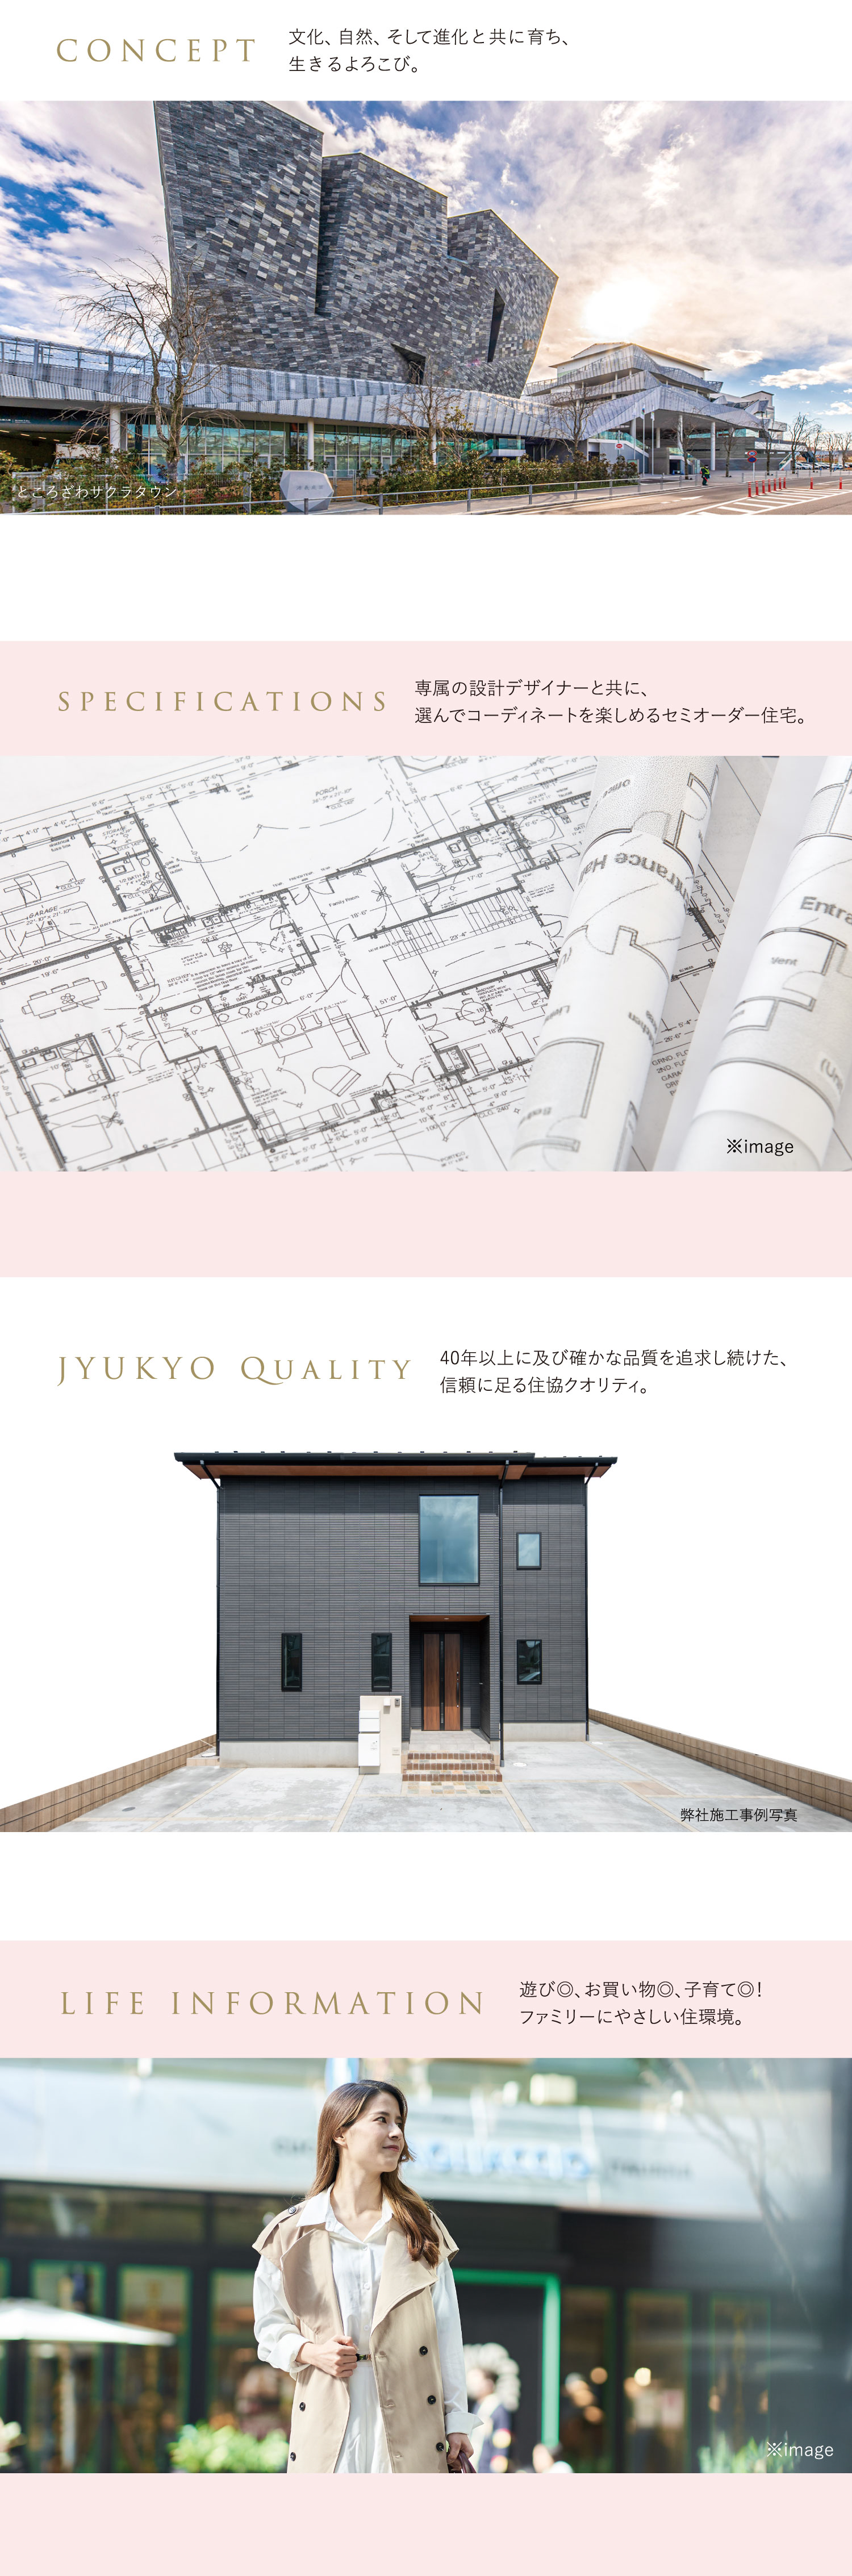 CONCEPT,SPECIFICATIONS,JYUKYOQUALITY,LIFEINFORMATION